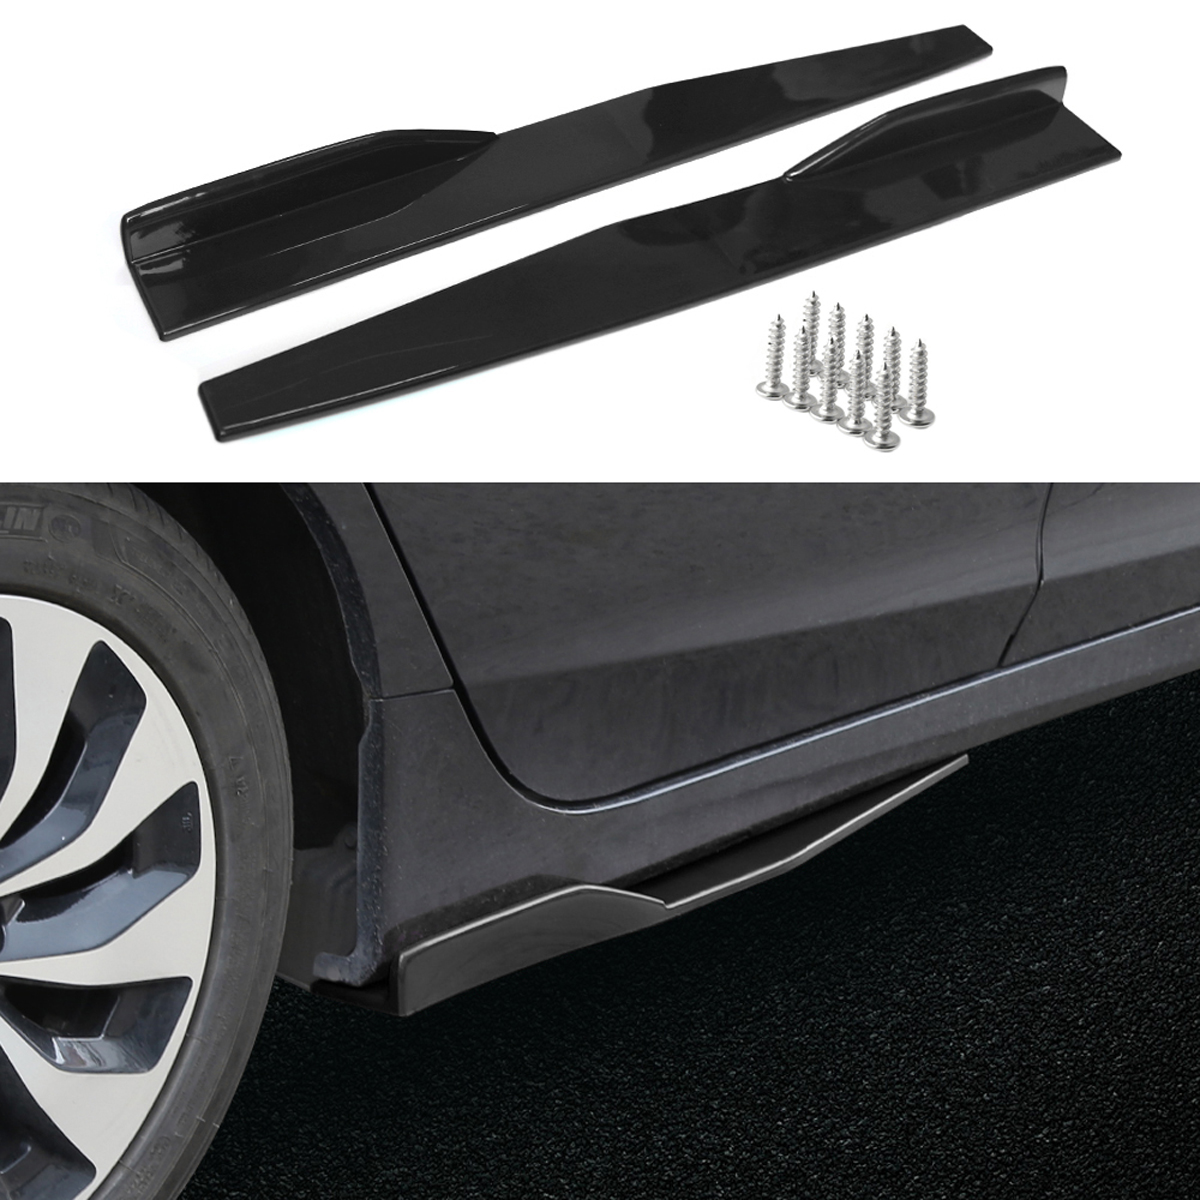 

Black Car Side Skirt Door Edge Protector Winglet Wings Canard Diffuser Modified Universal